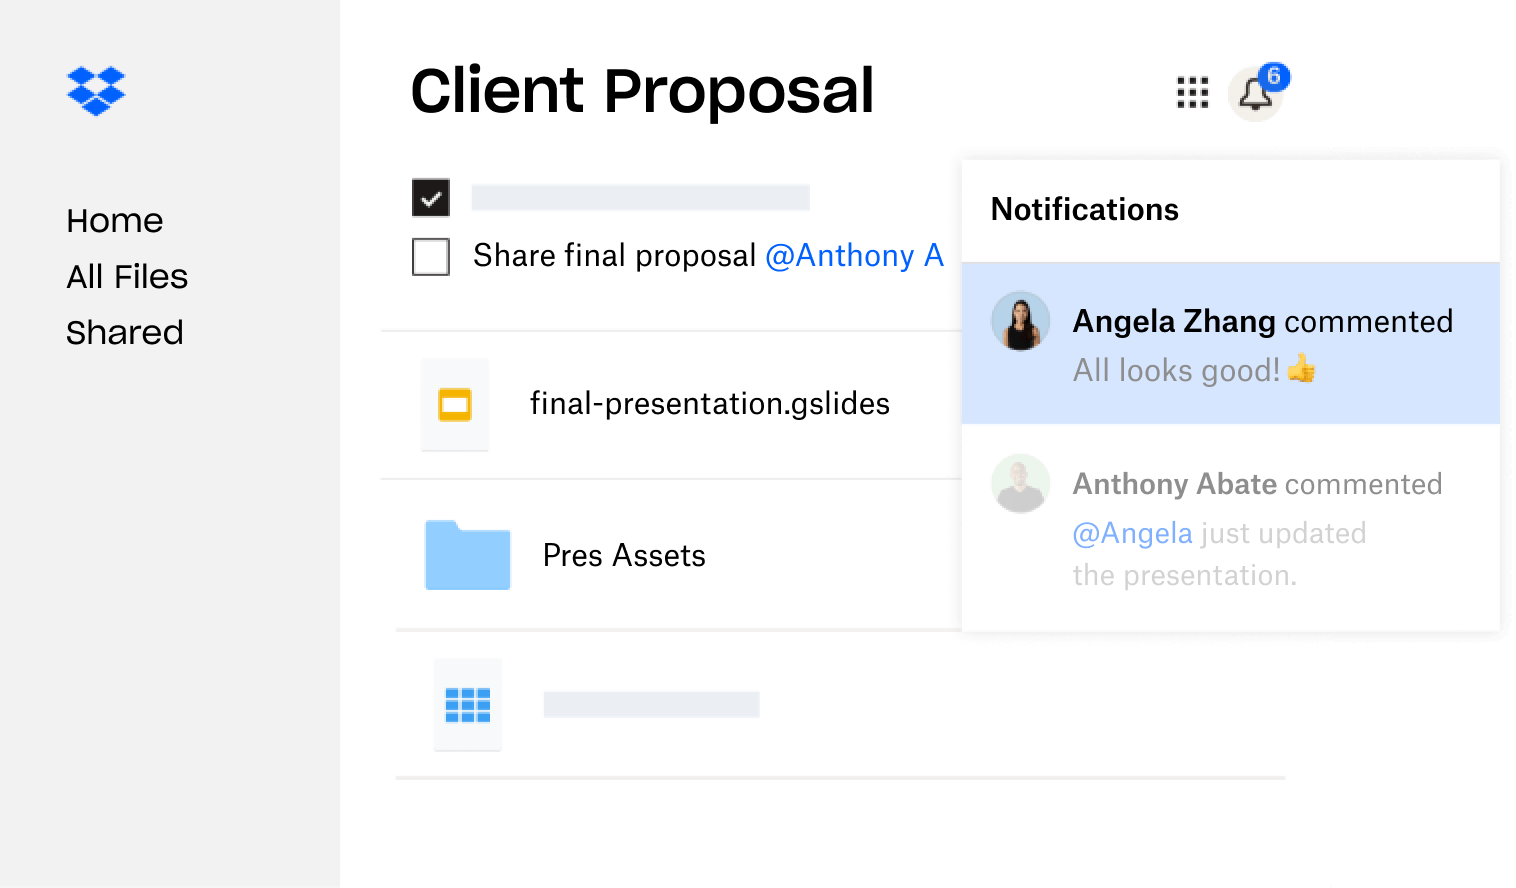 A client proposal created in Dropbox is shared with multiple users who have left feedback.